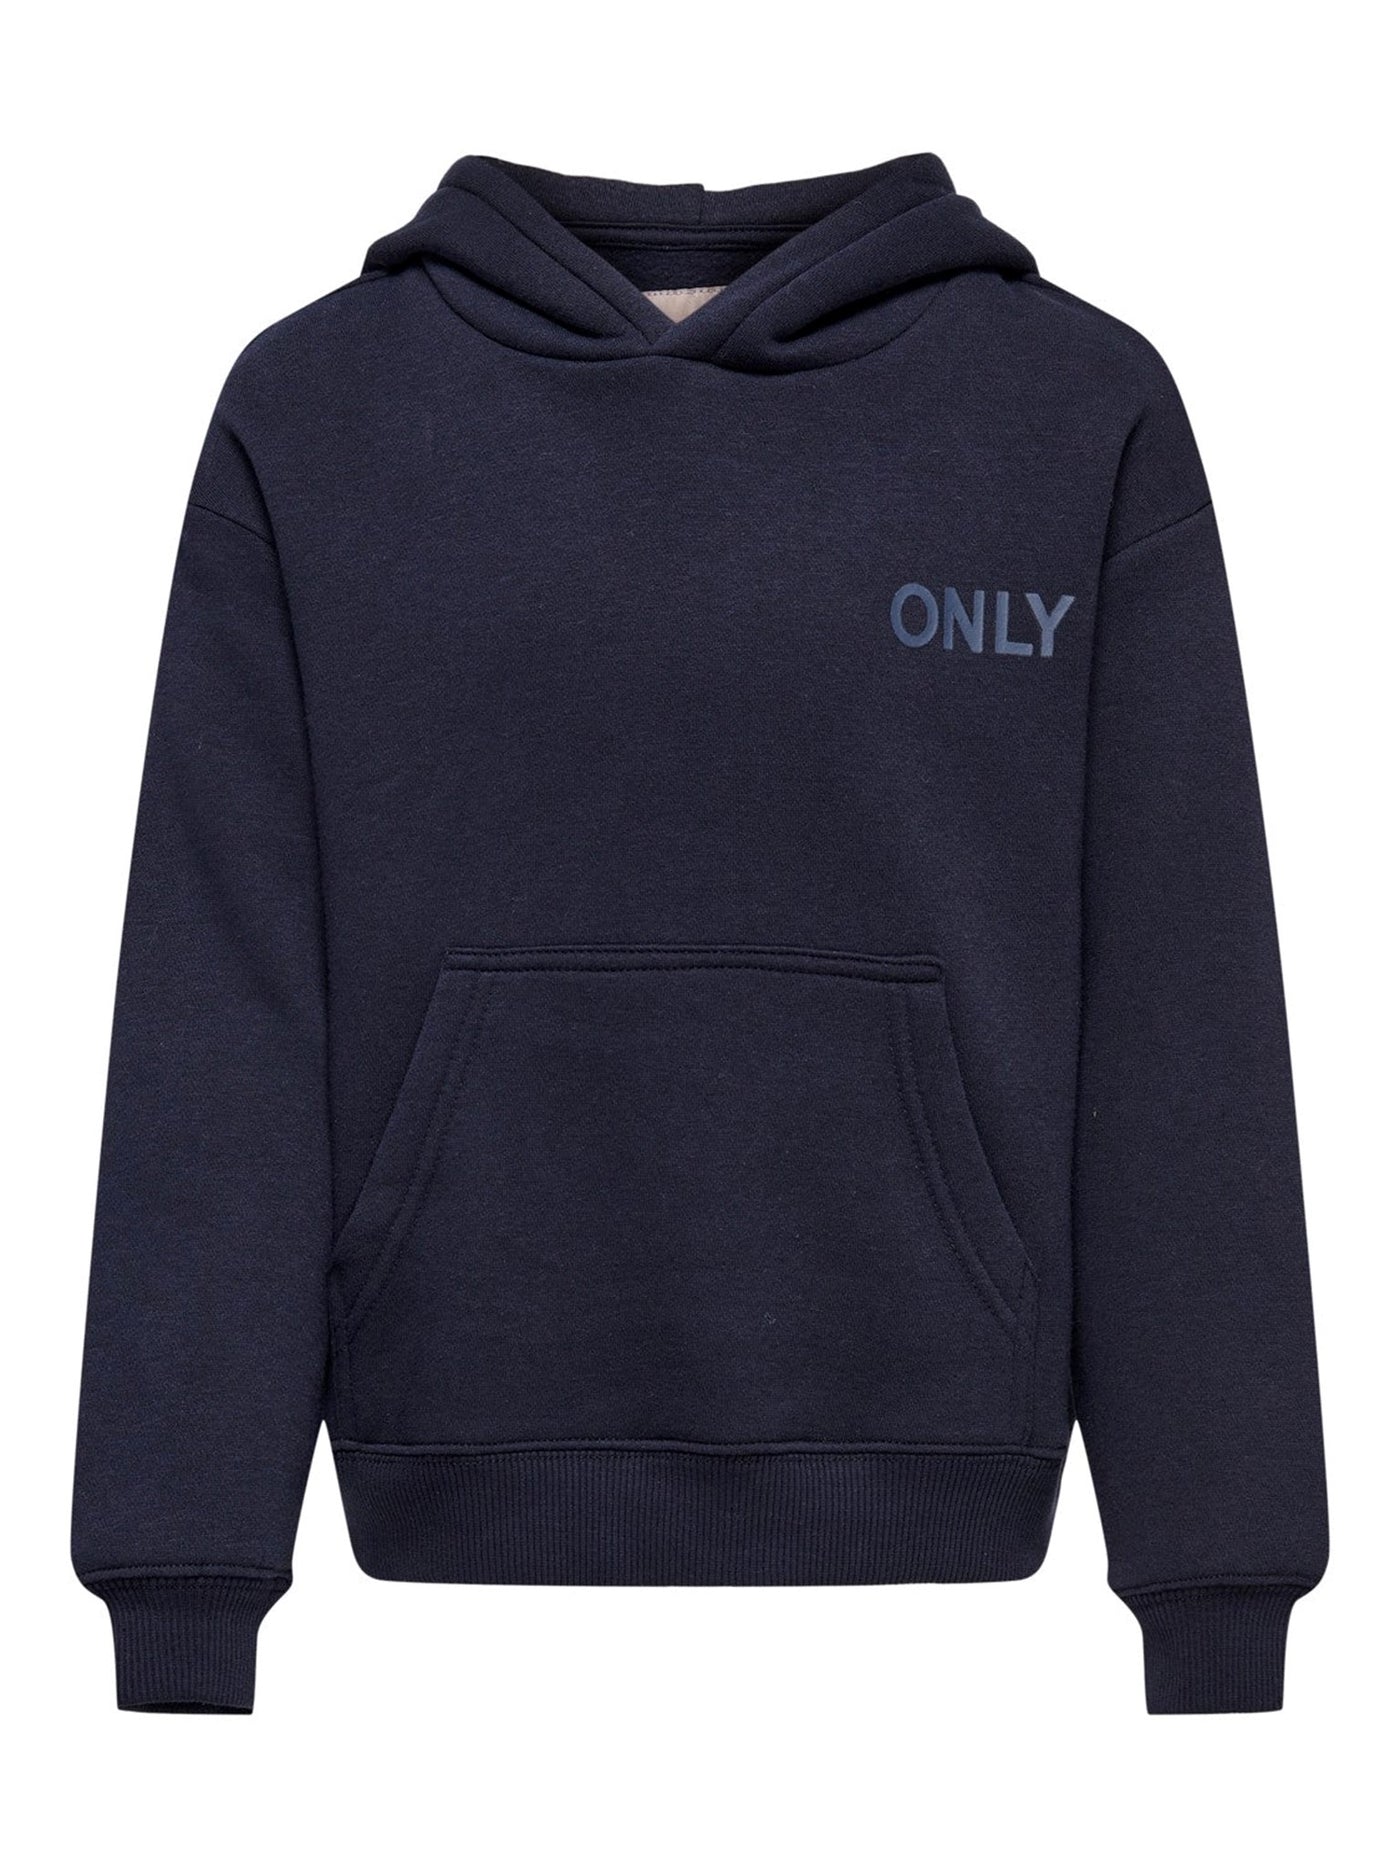 Every Life Small Logo Hoodie - Night Sky - Kids Only